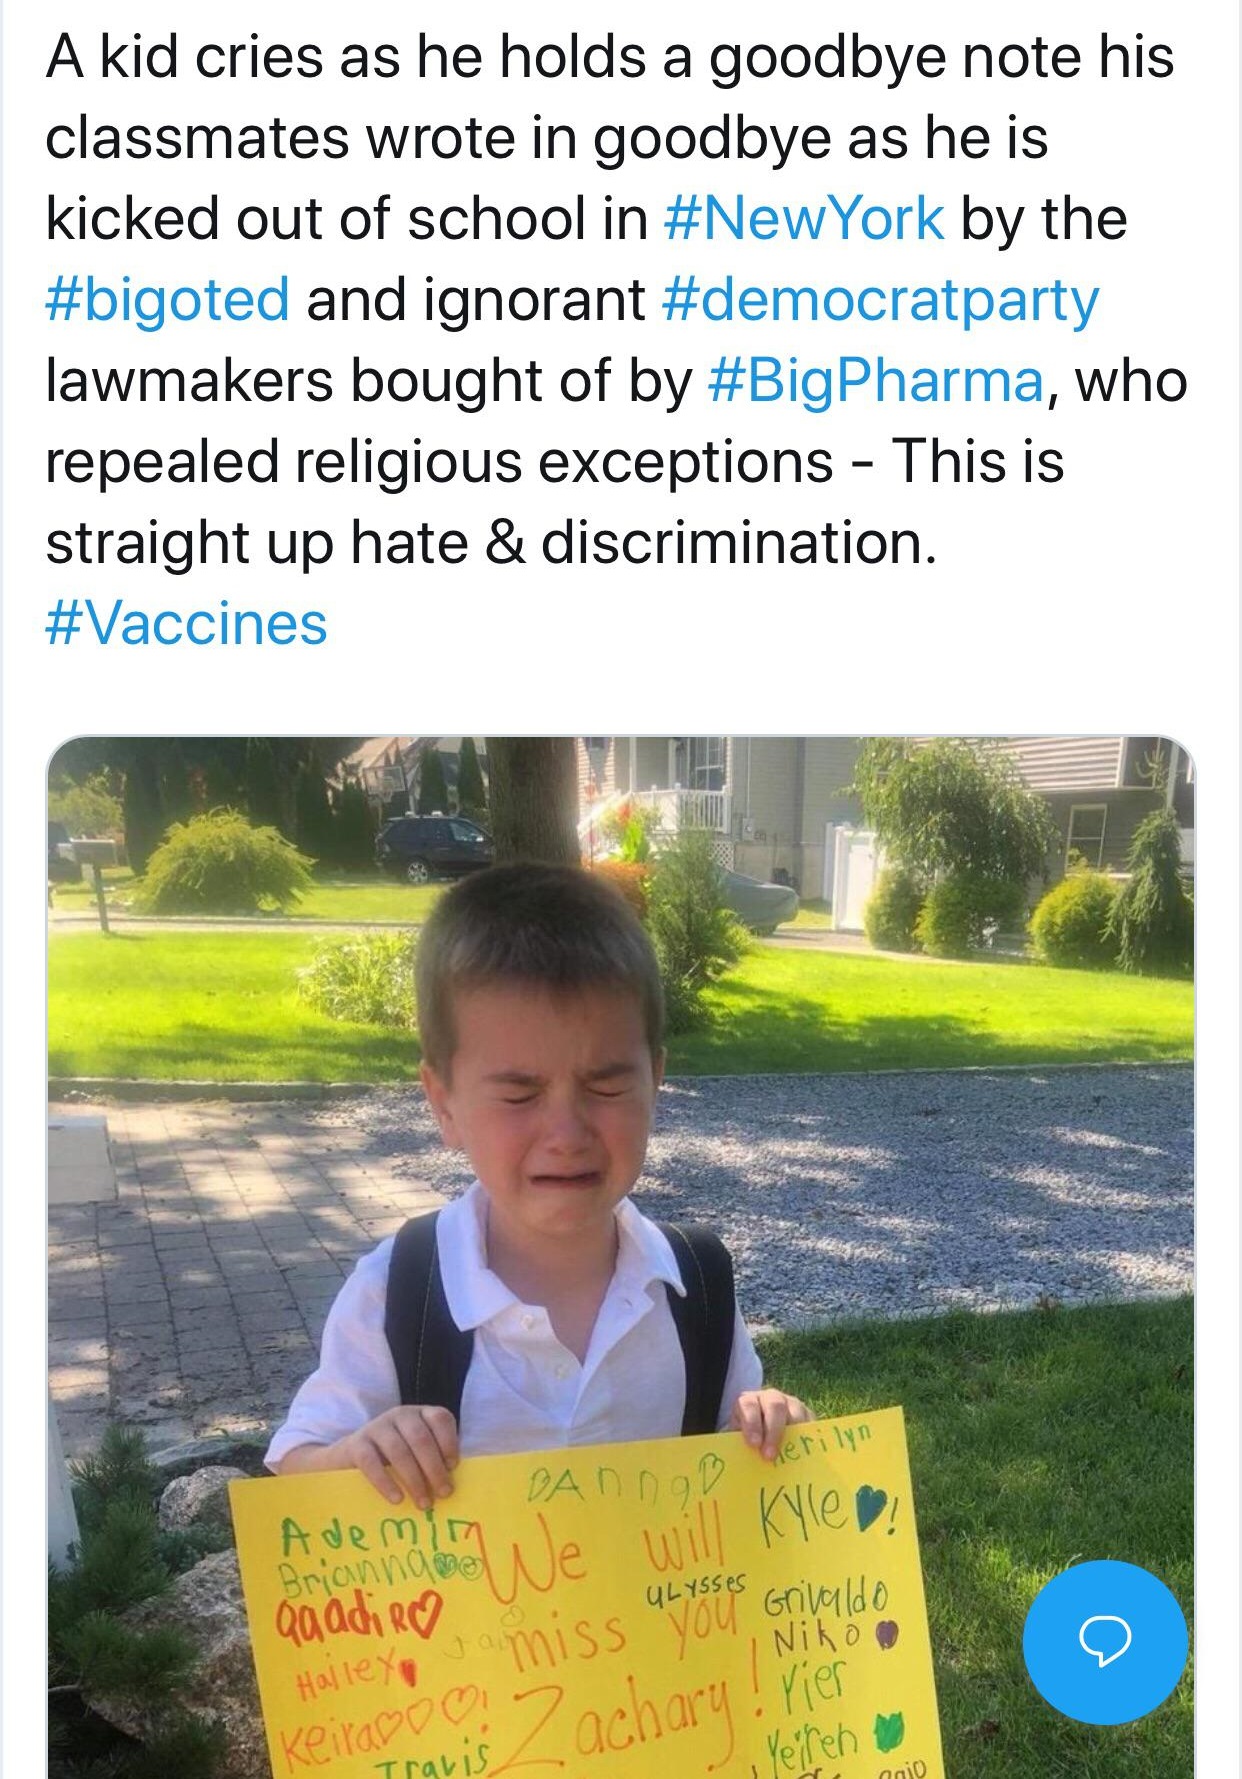 nature - A kid cries as he holds a goodbye note his classmates wrote in goodbye as he is kicked out of school in York by the and ignorant lawmakers bought of by , who repealed religious exceptions This is straight up hate & discrimination. et Klep g Ademe